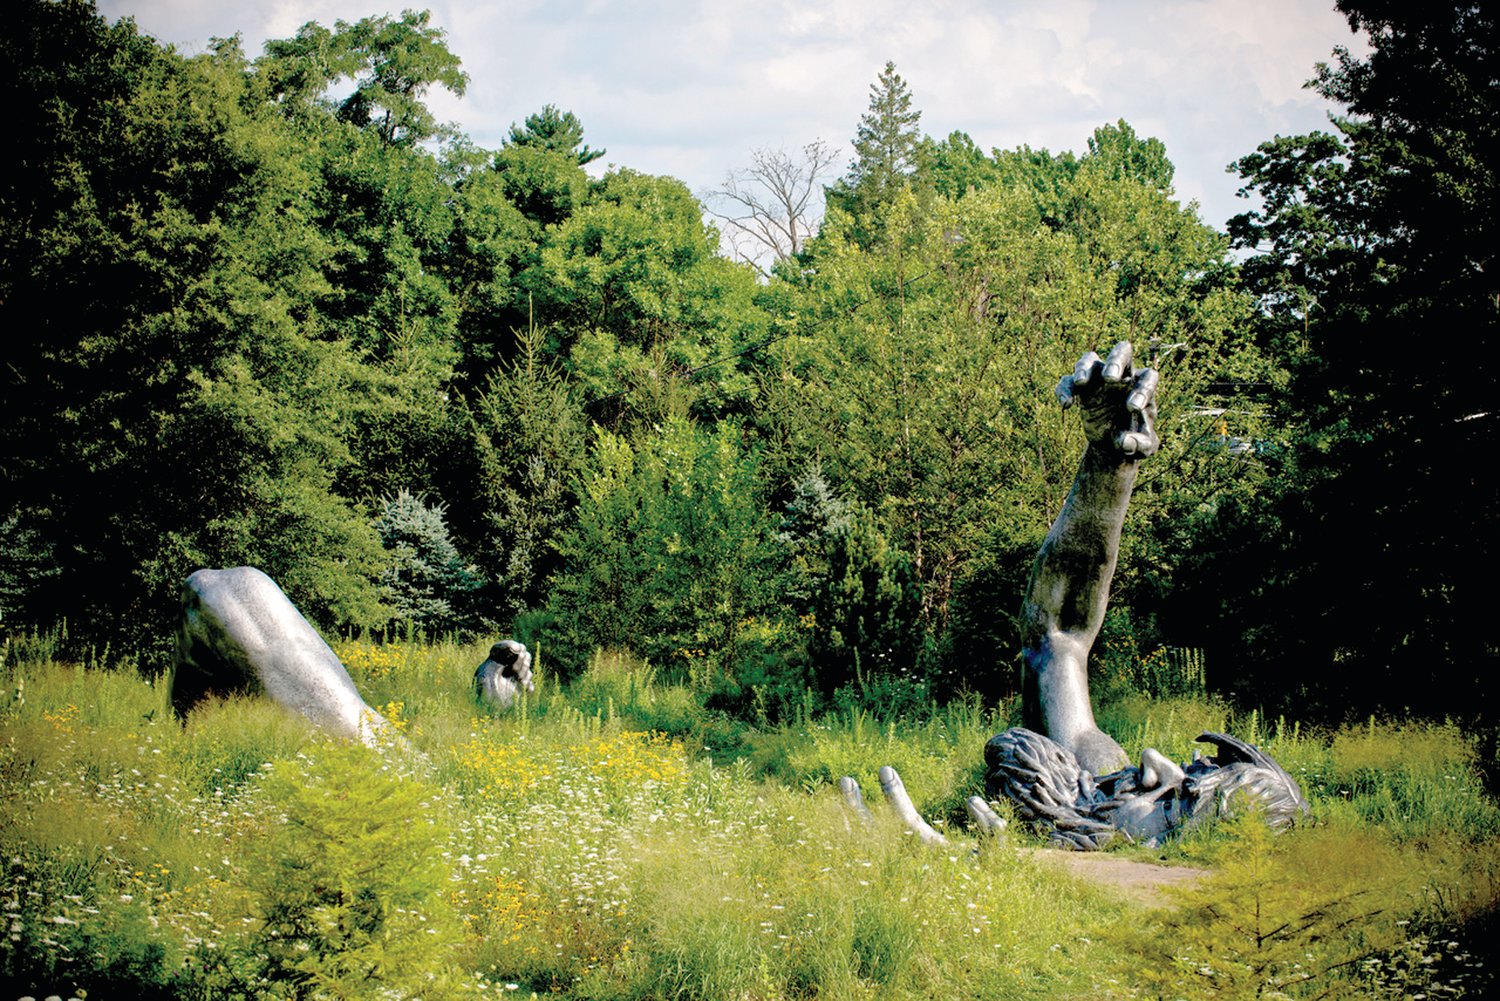 Seward Johnson’s 70-foot-wide monumental sculpture, “The Awakening,” is located at D&R Greenway’s St. Michaels Farm Preserve in Hopewell Township, N.J.